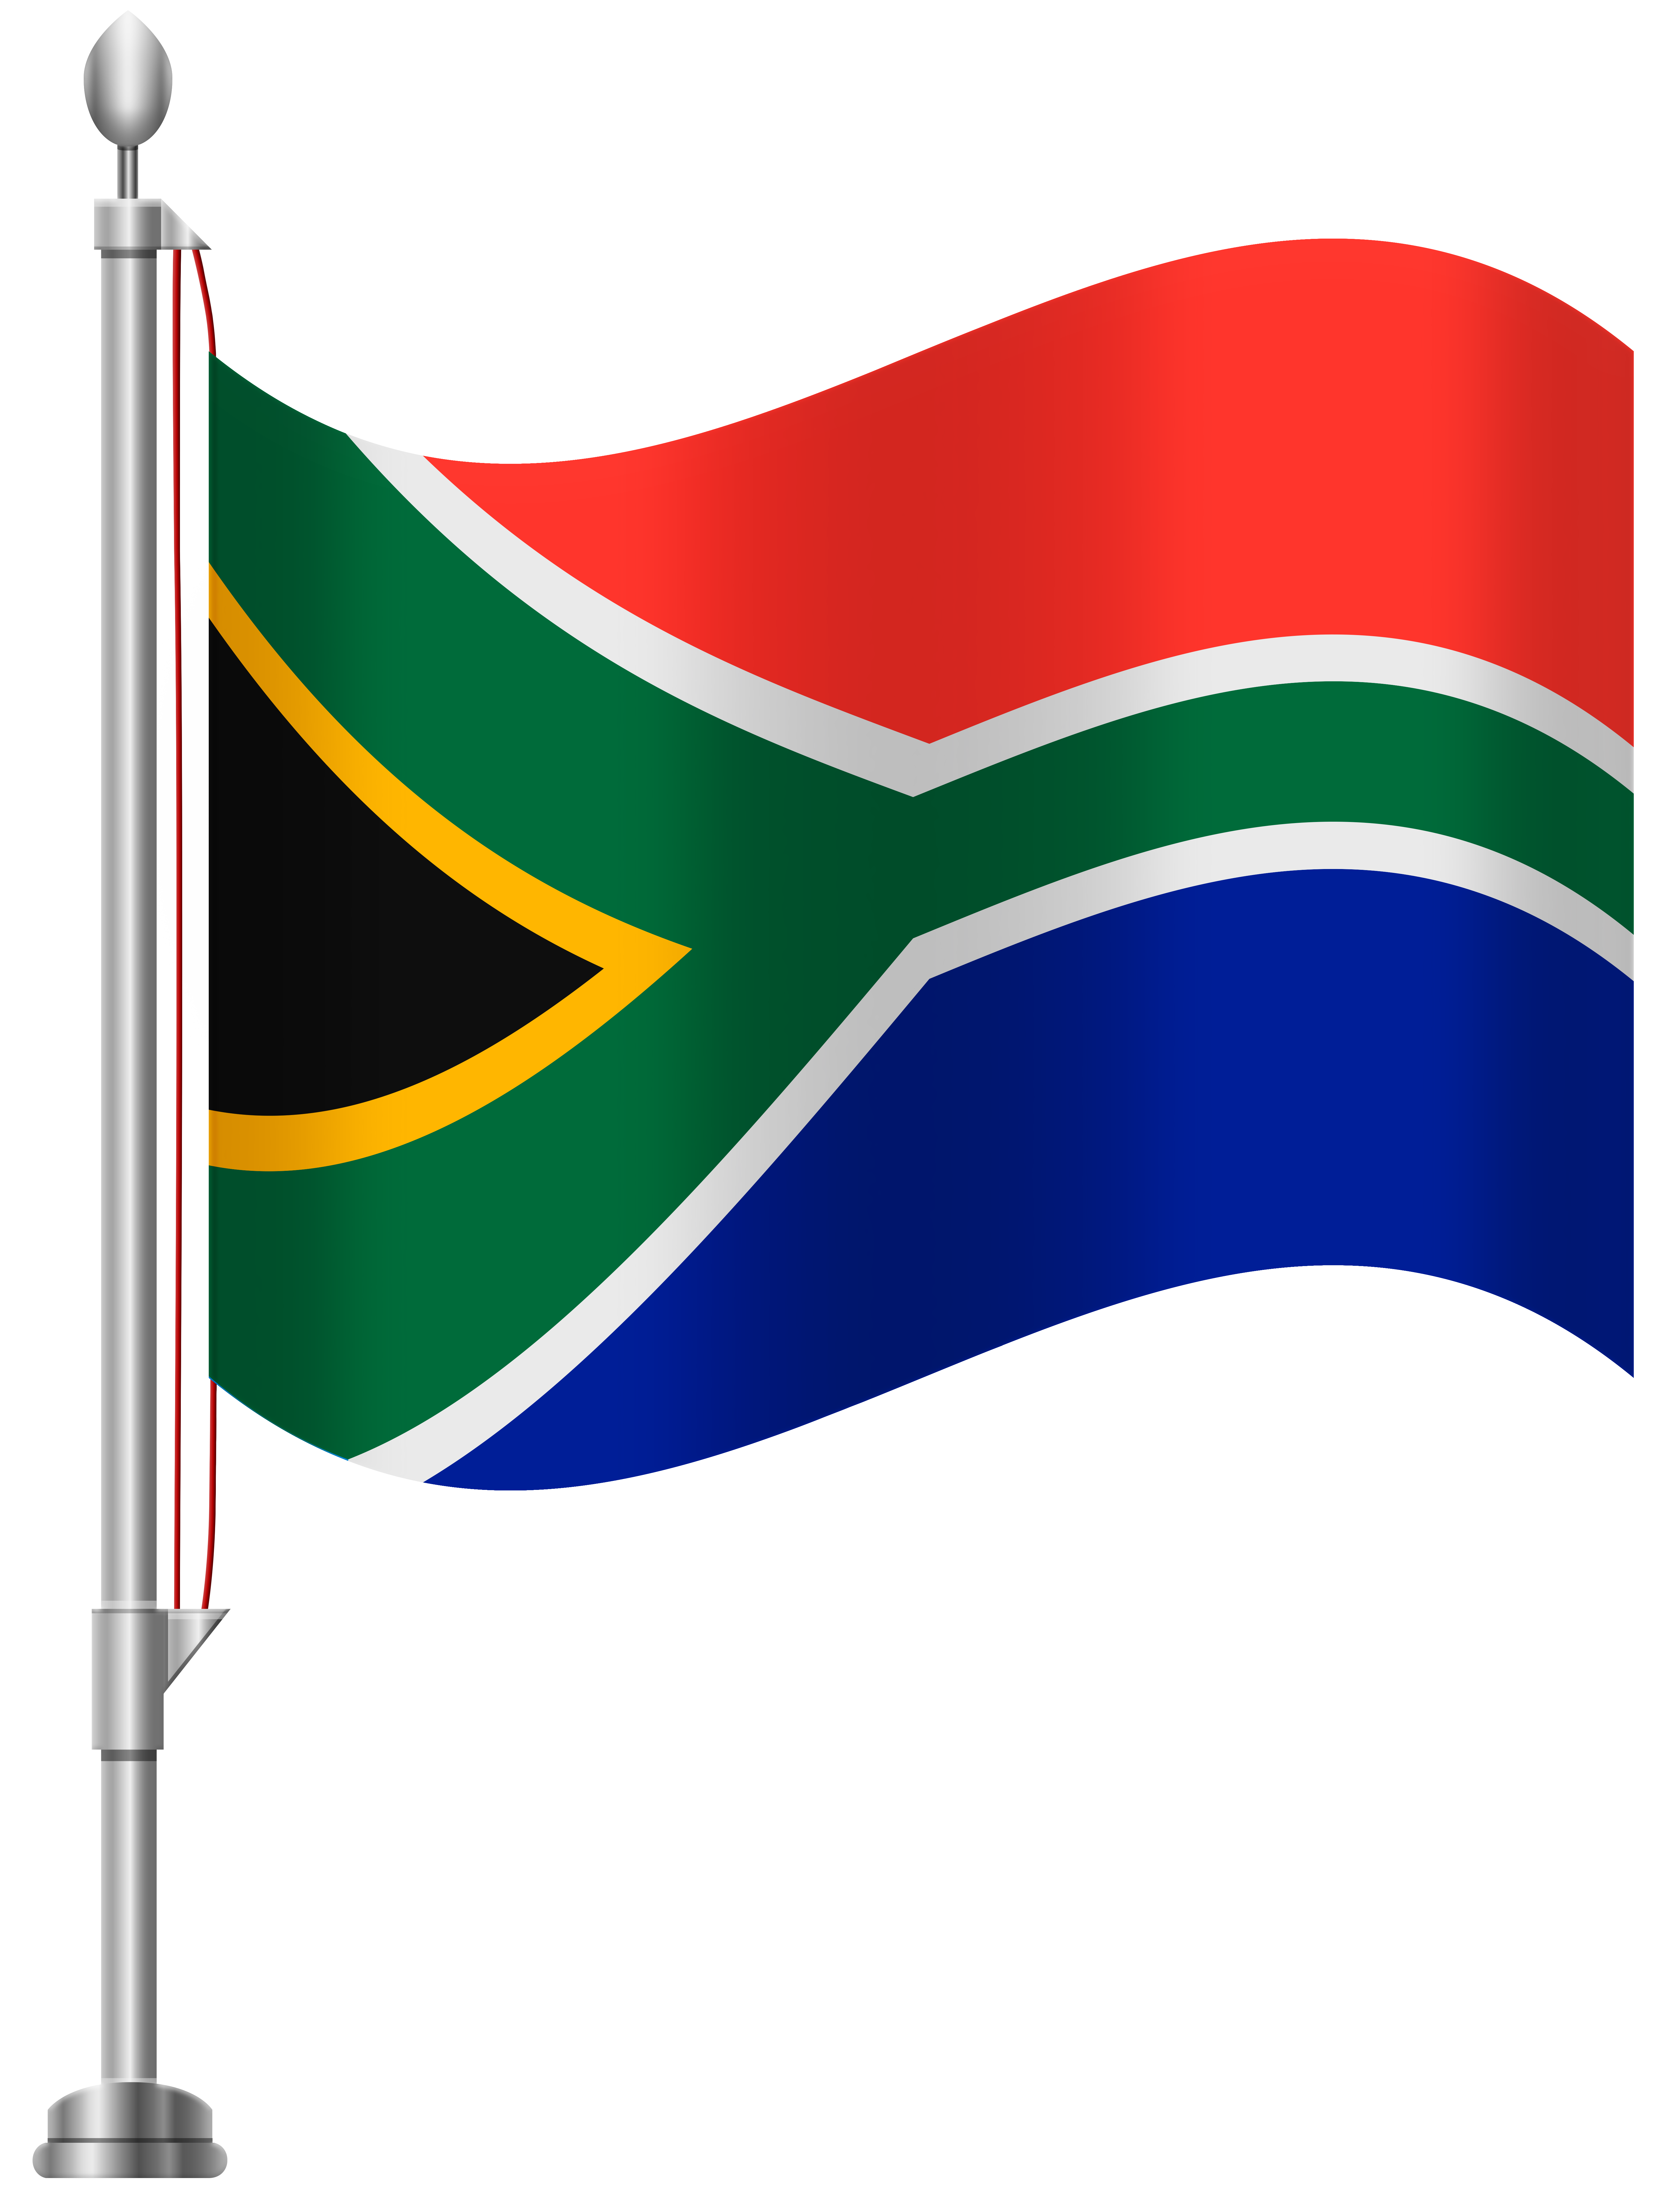 south africa clipart – south africa news – Crpodt